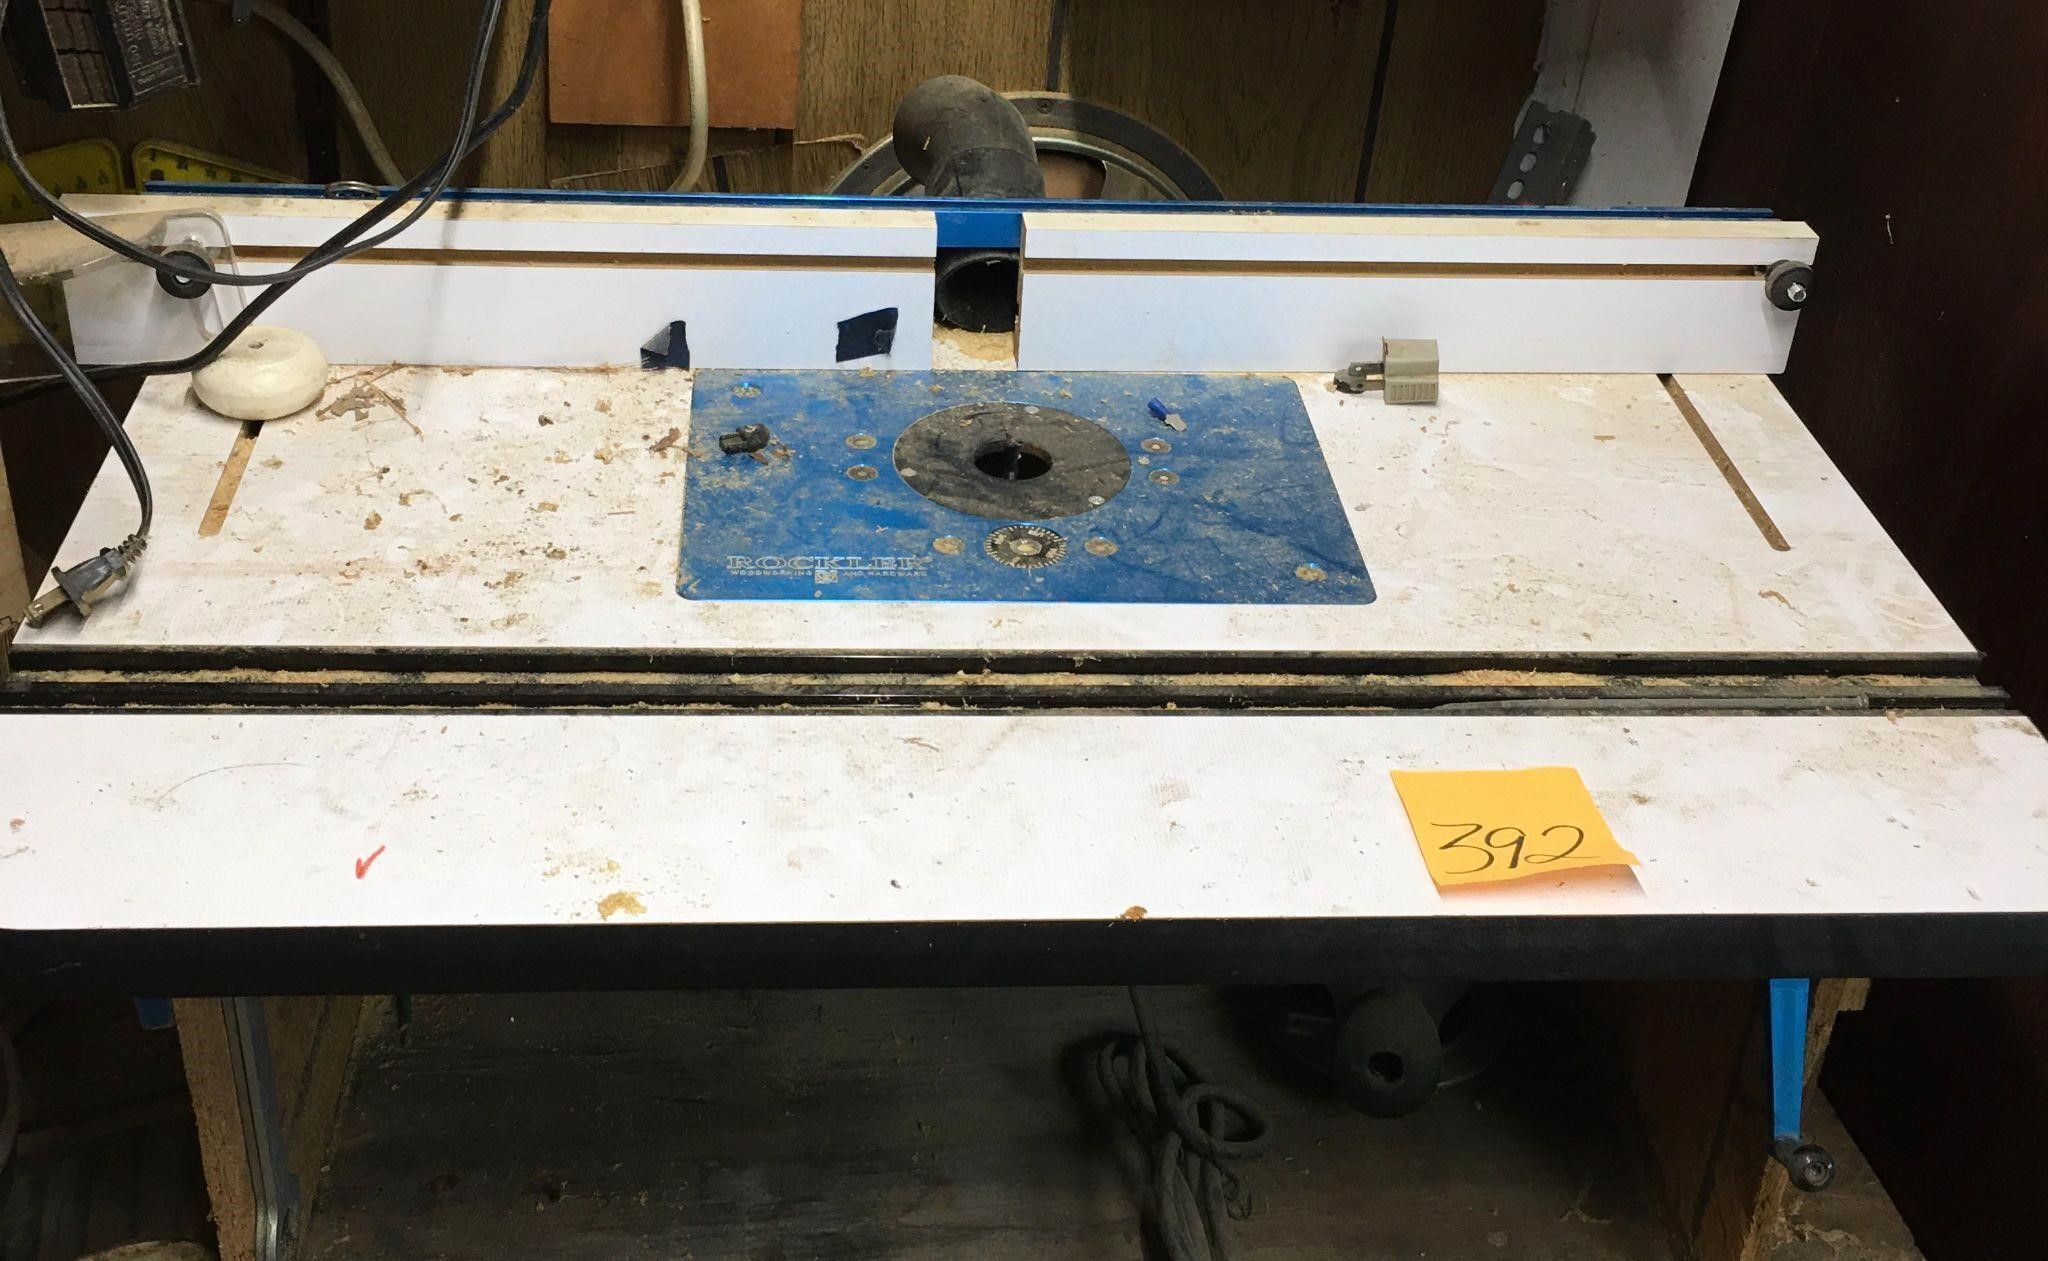 Router Saw Table-Bring Tools to Remove